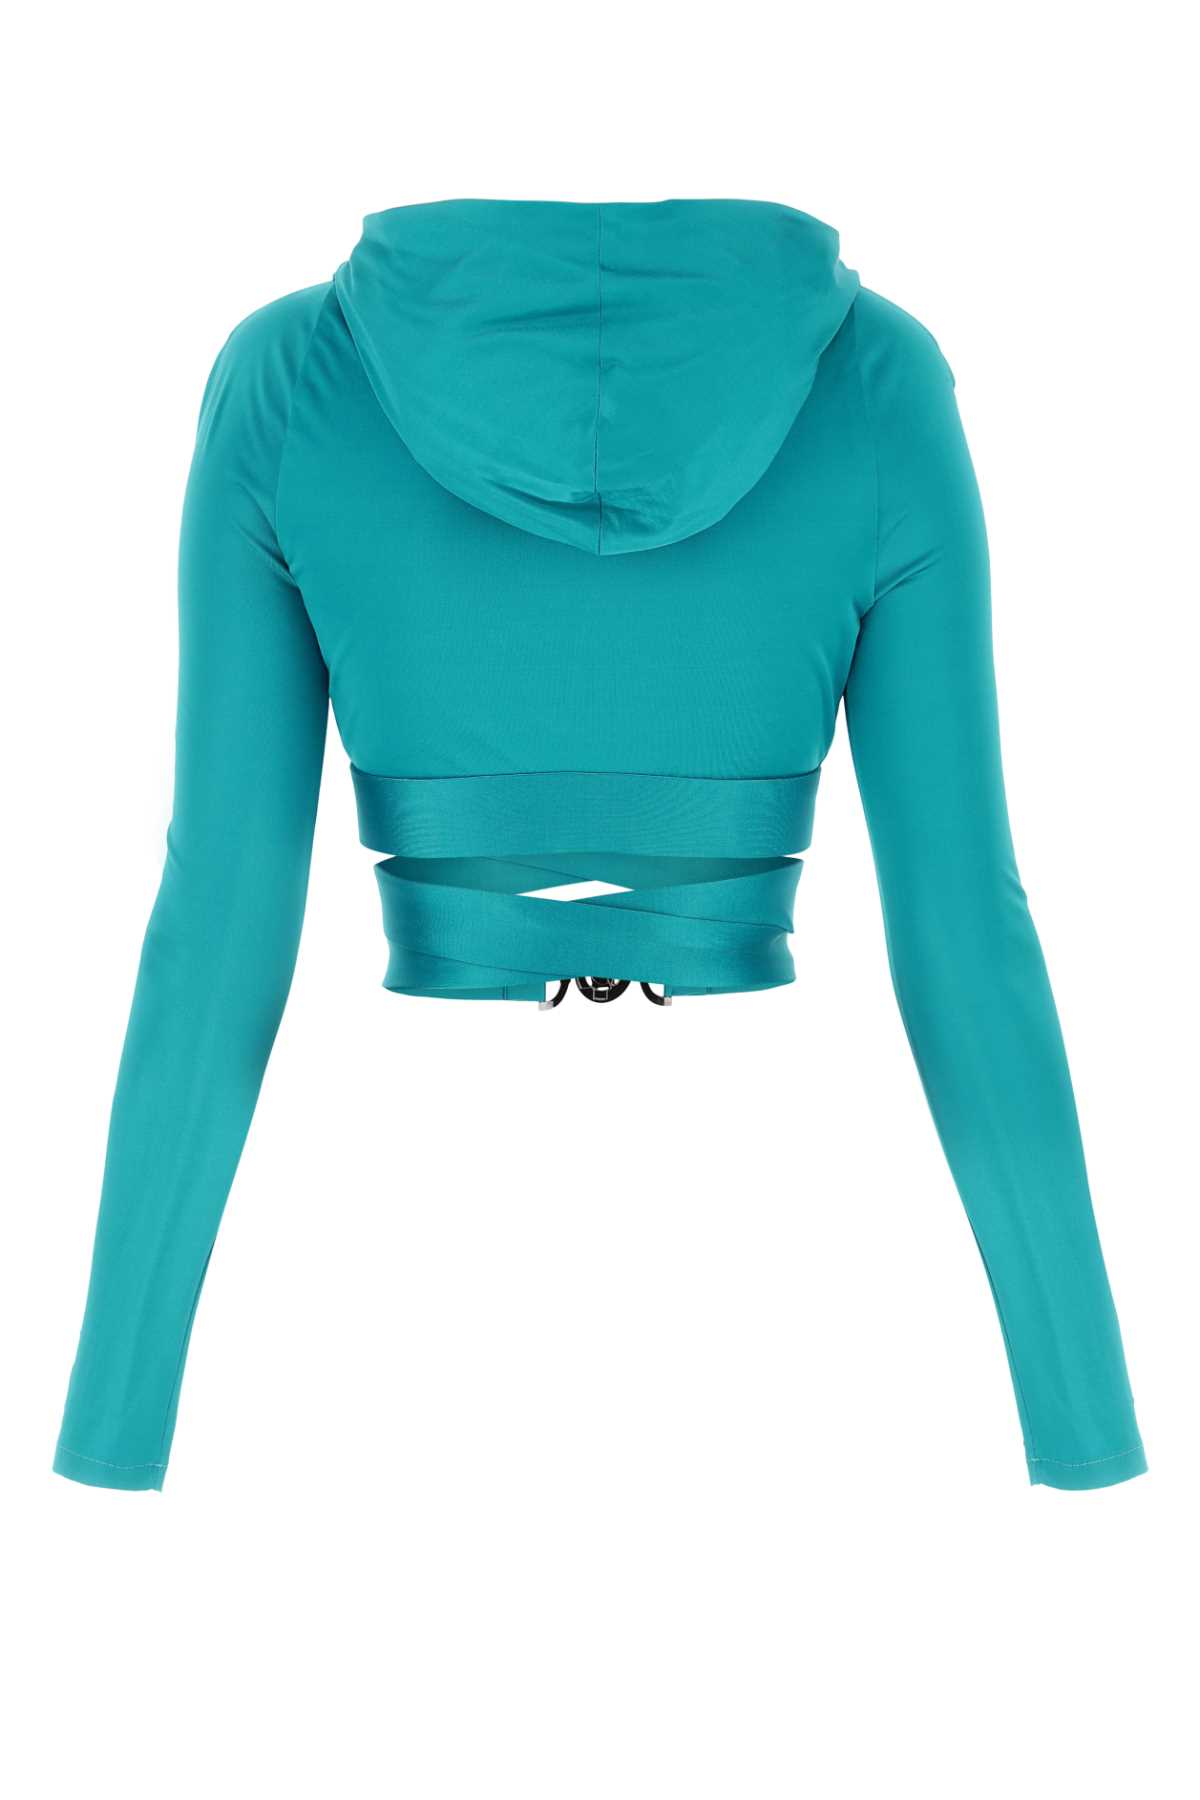 Shop Versace Teal Green Viscose Top In Turchese